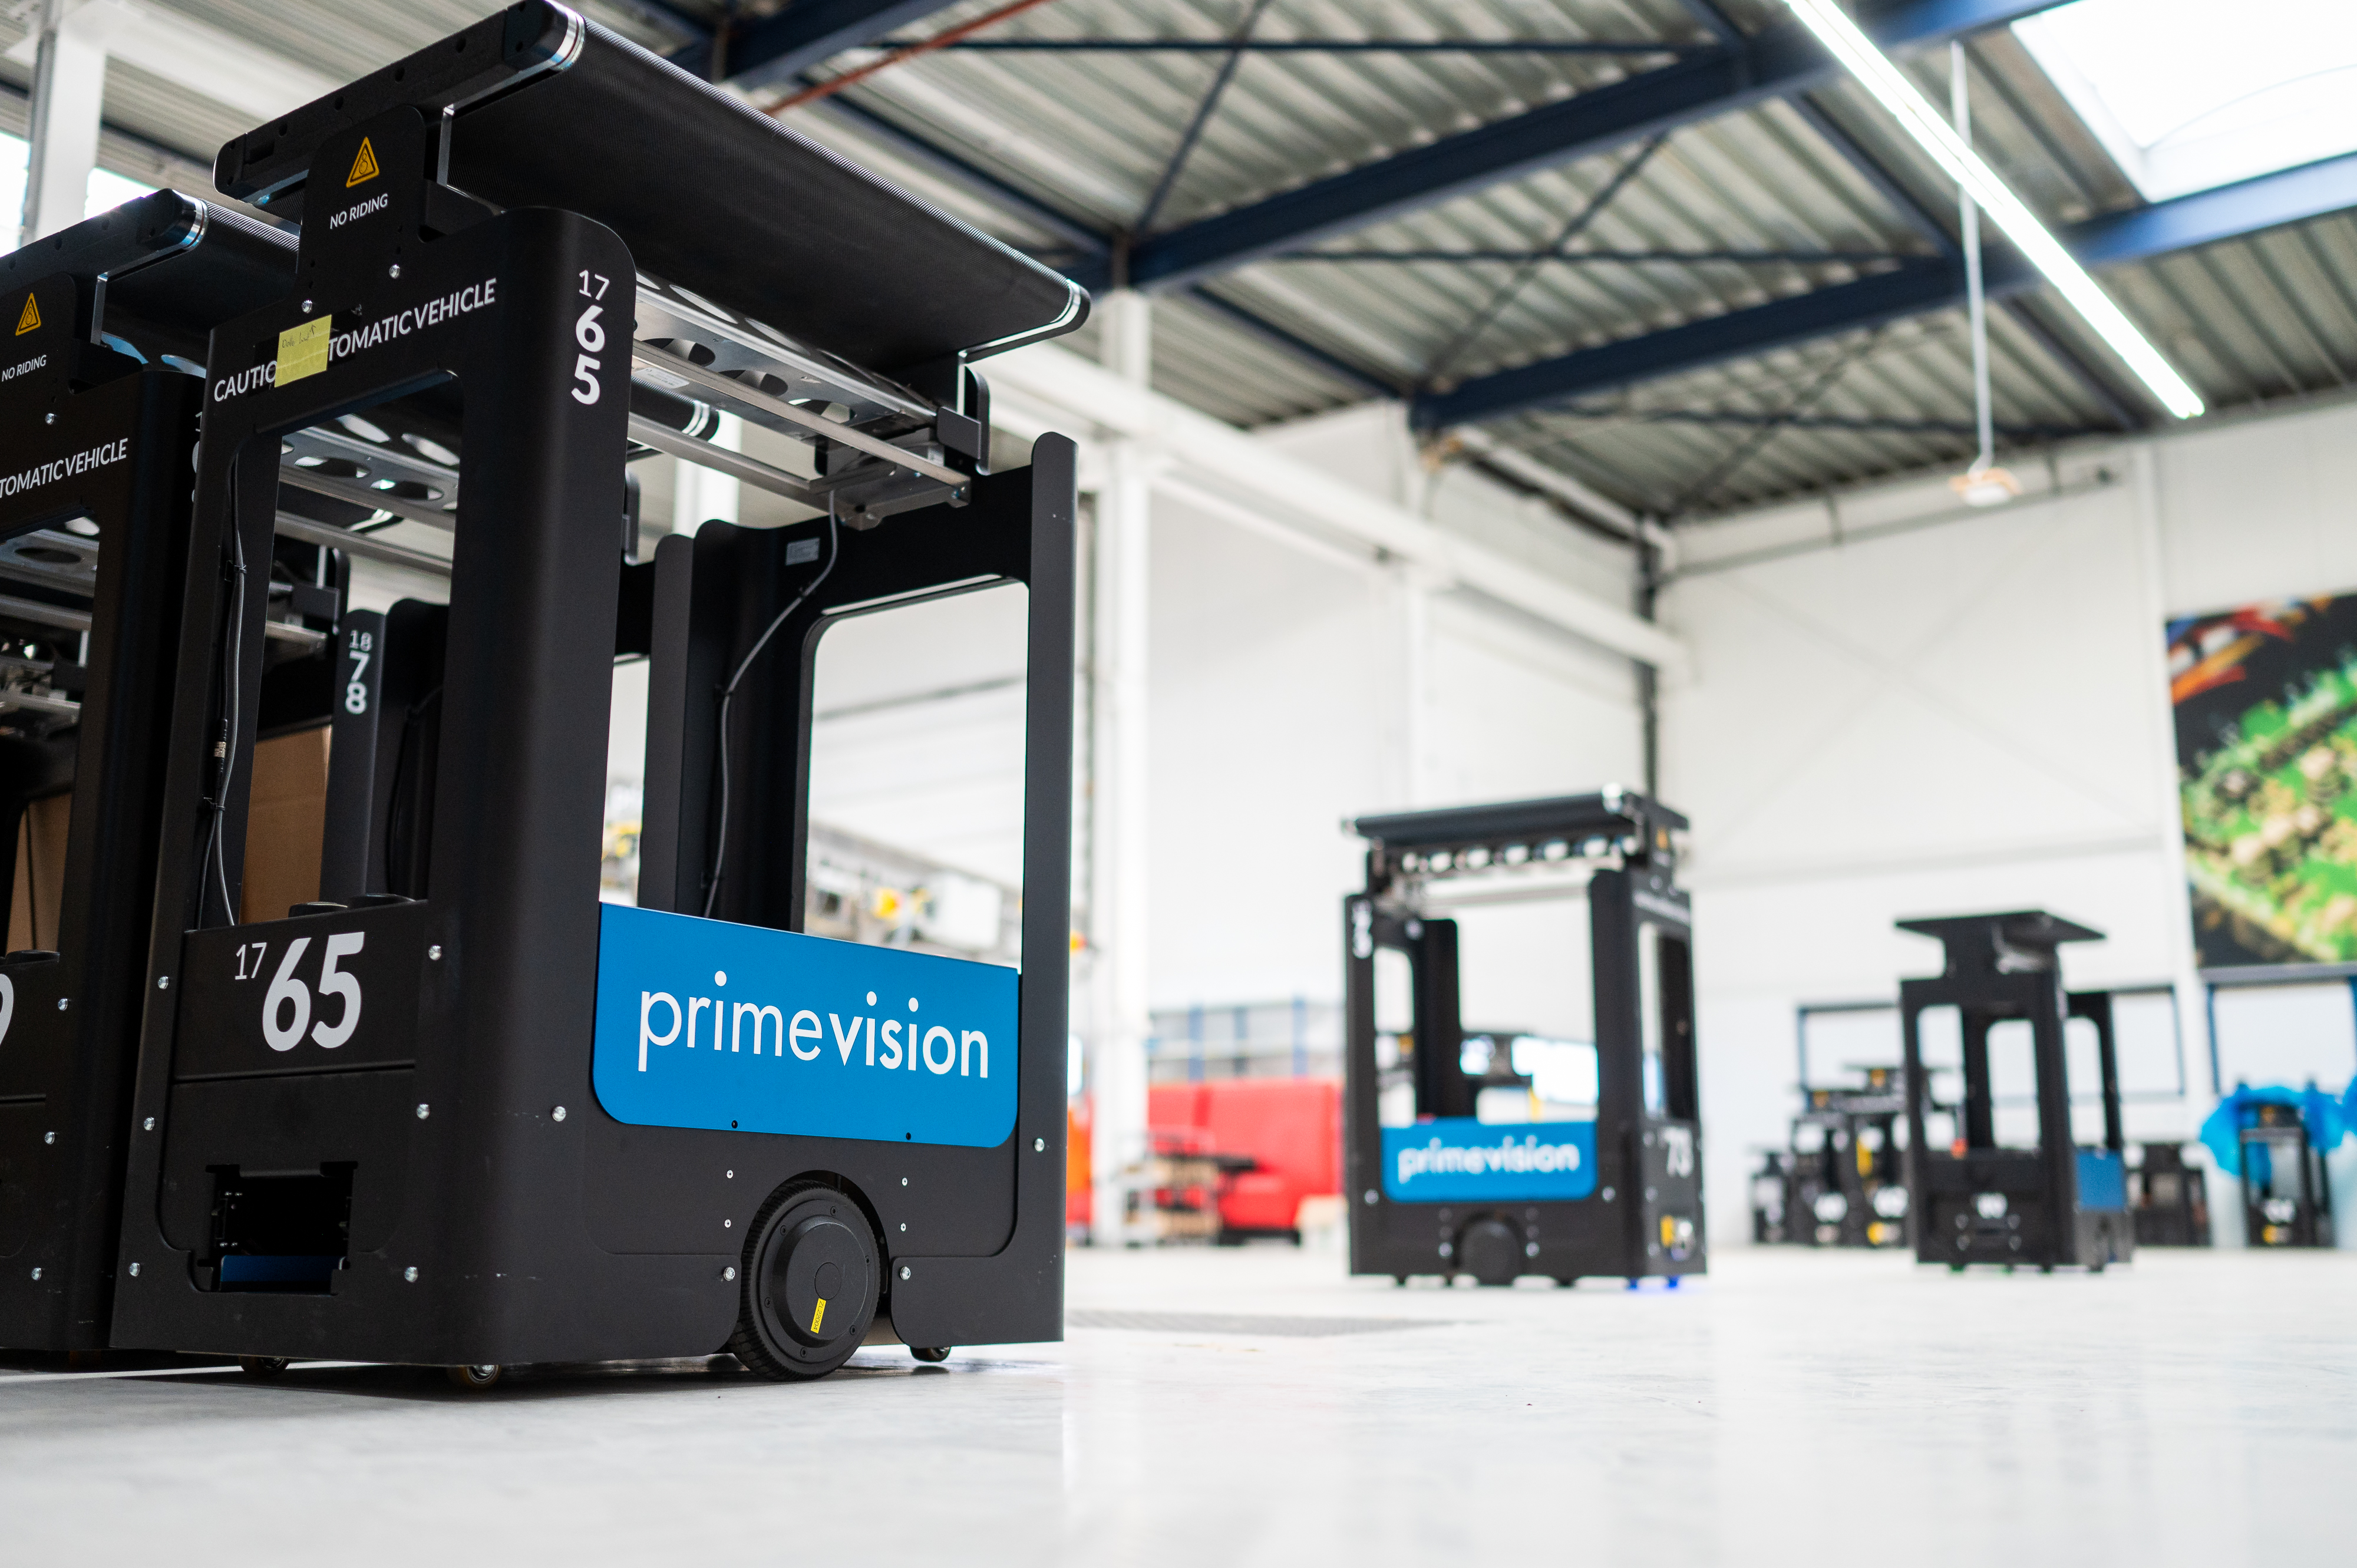 Completely flexible, Robots can accommodate sorting parcels to more or less drivers without any of the restrictions of fixed infrastructure.